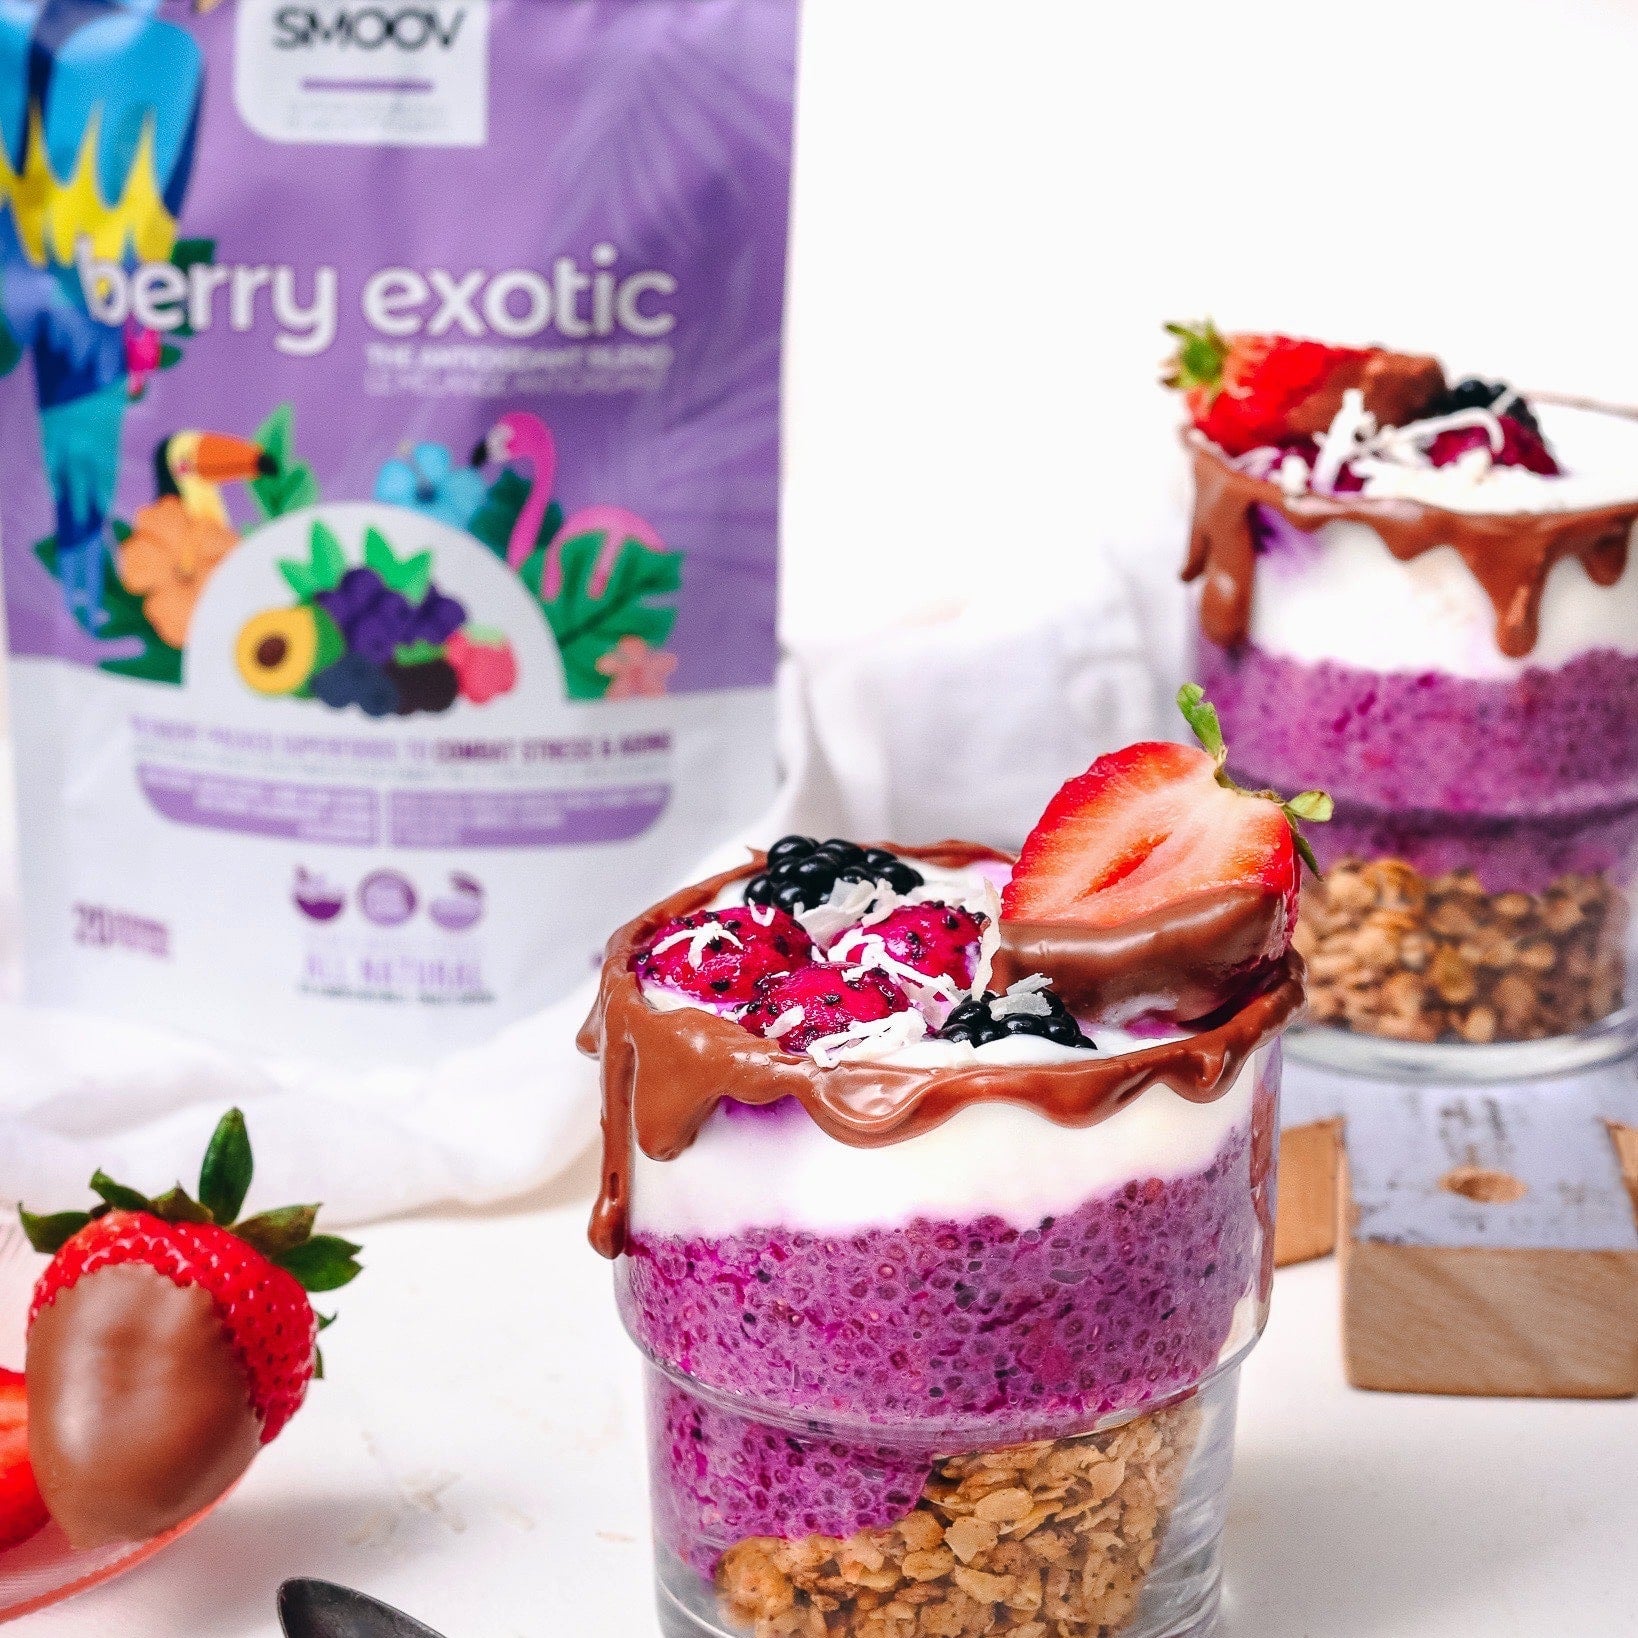 SMOOV berry exotic blend has 8 antioxidant-rich superfoods, 7 of which are some of the world's most nutritious berries. Acai berry, Maqui berry, Red & Black Goji berry, Camu Camu berry, Blueberry, Blackberry & Lucuma. 